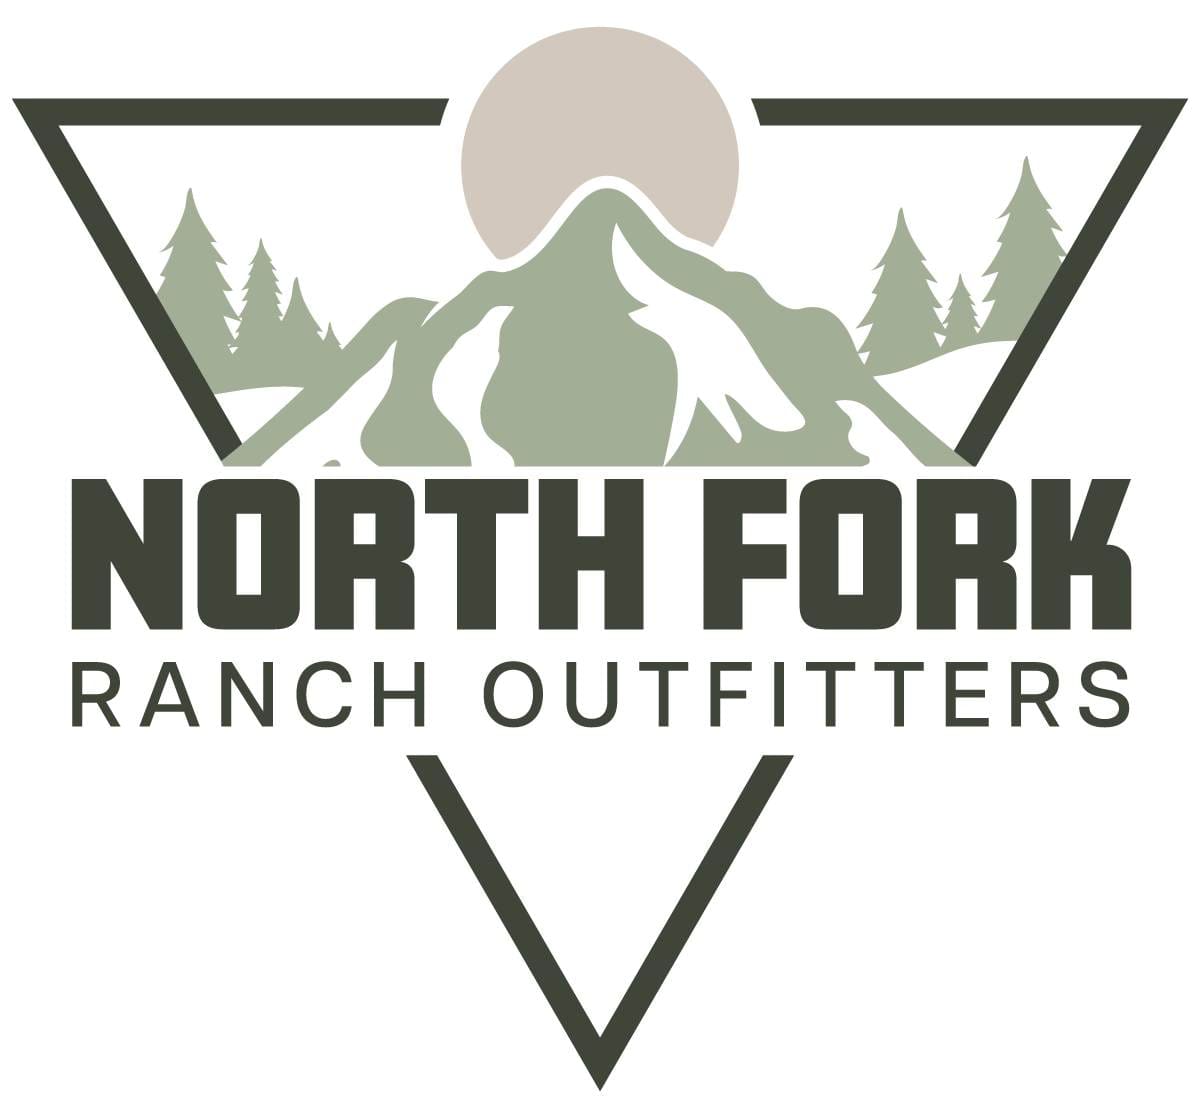 669a6a02a6ecb_CX-114757_North-Fork-Ranch-Outfitters_Final